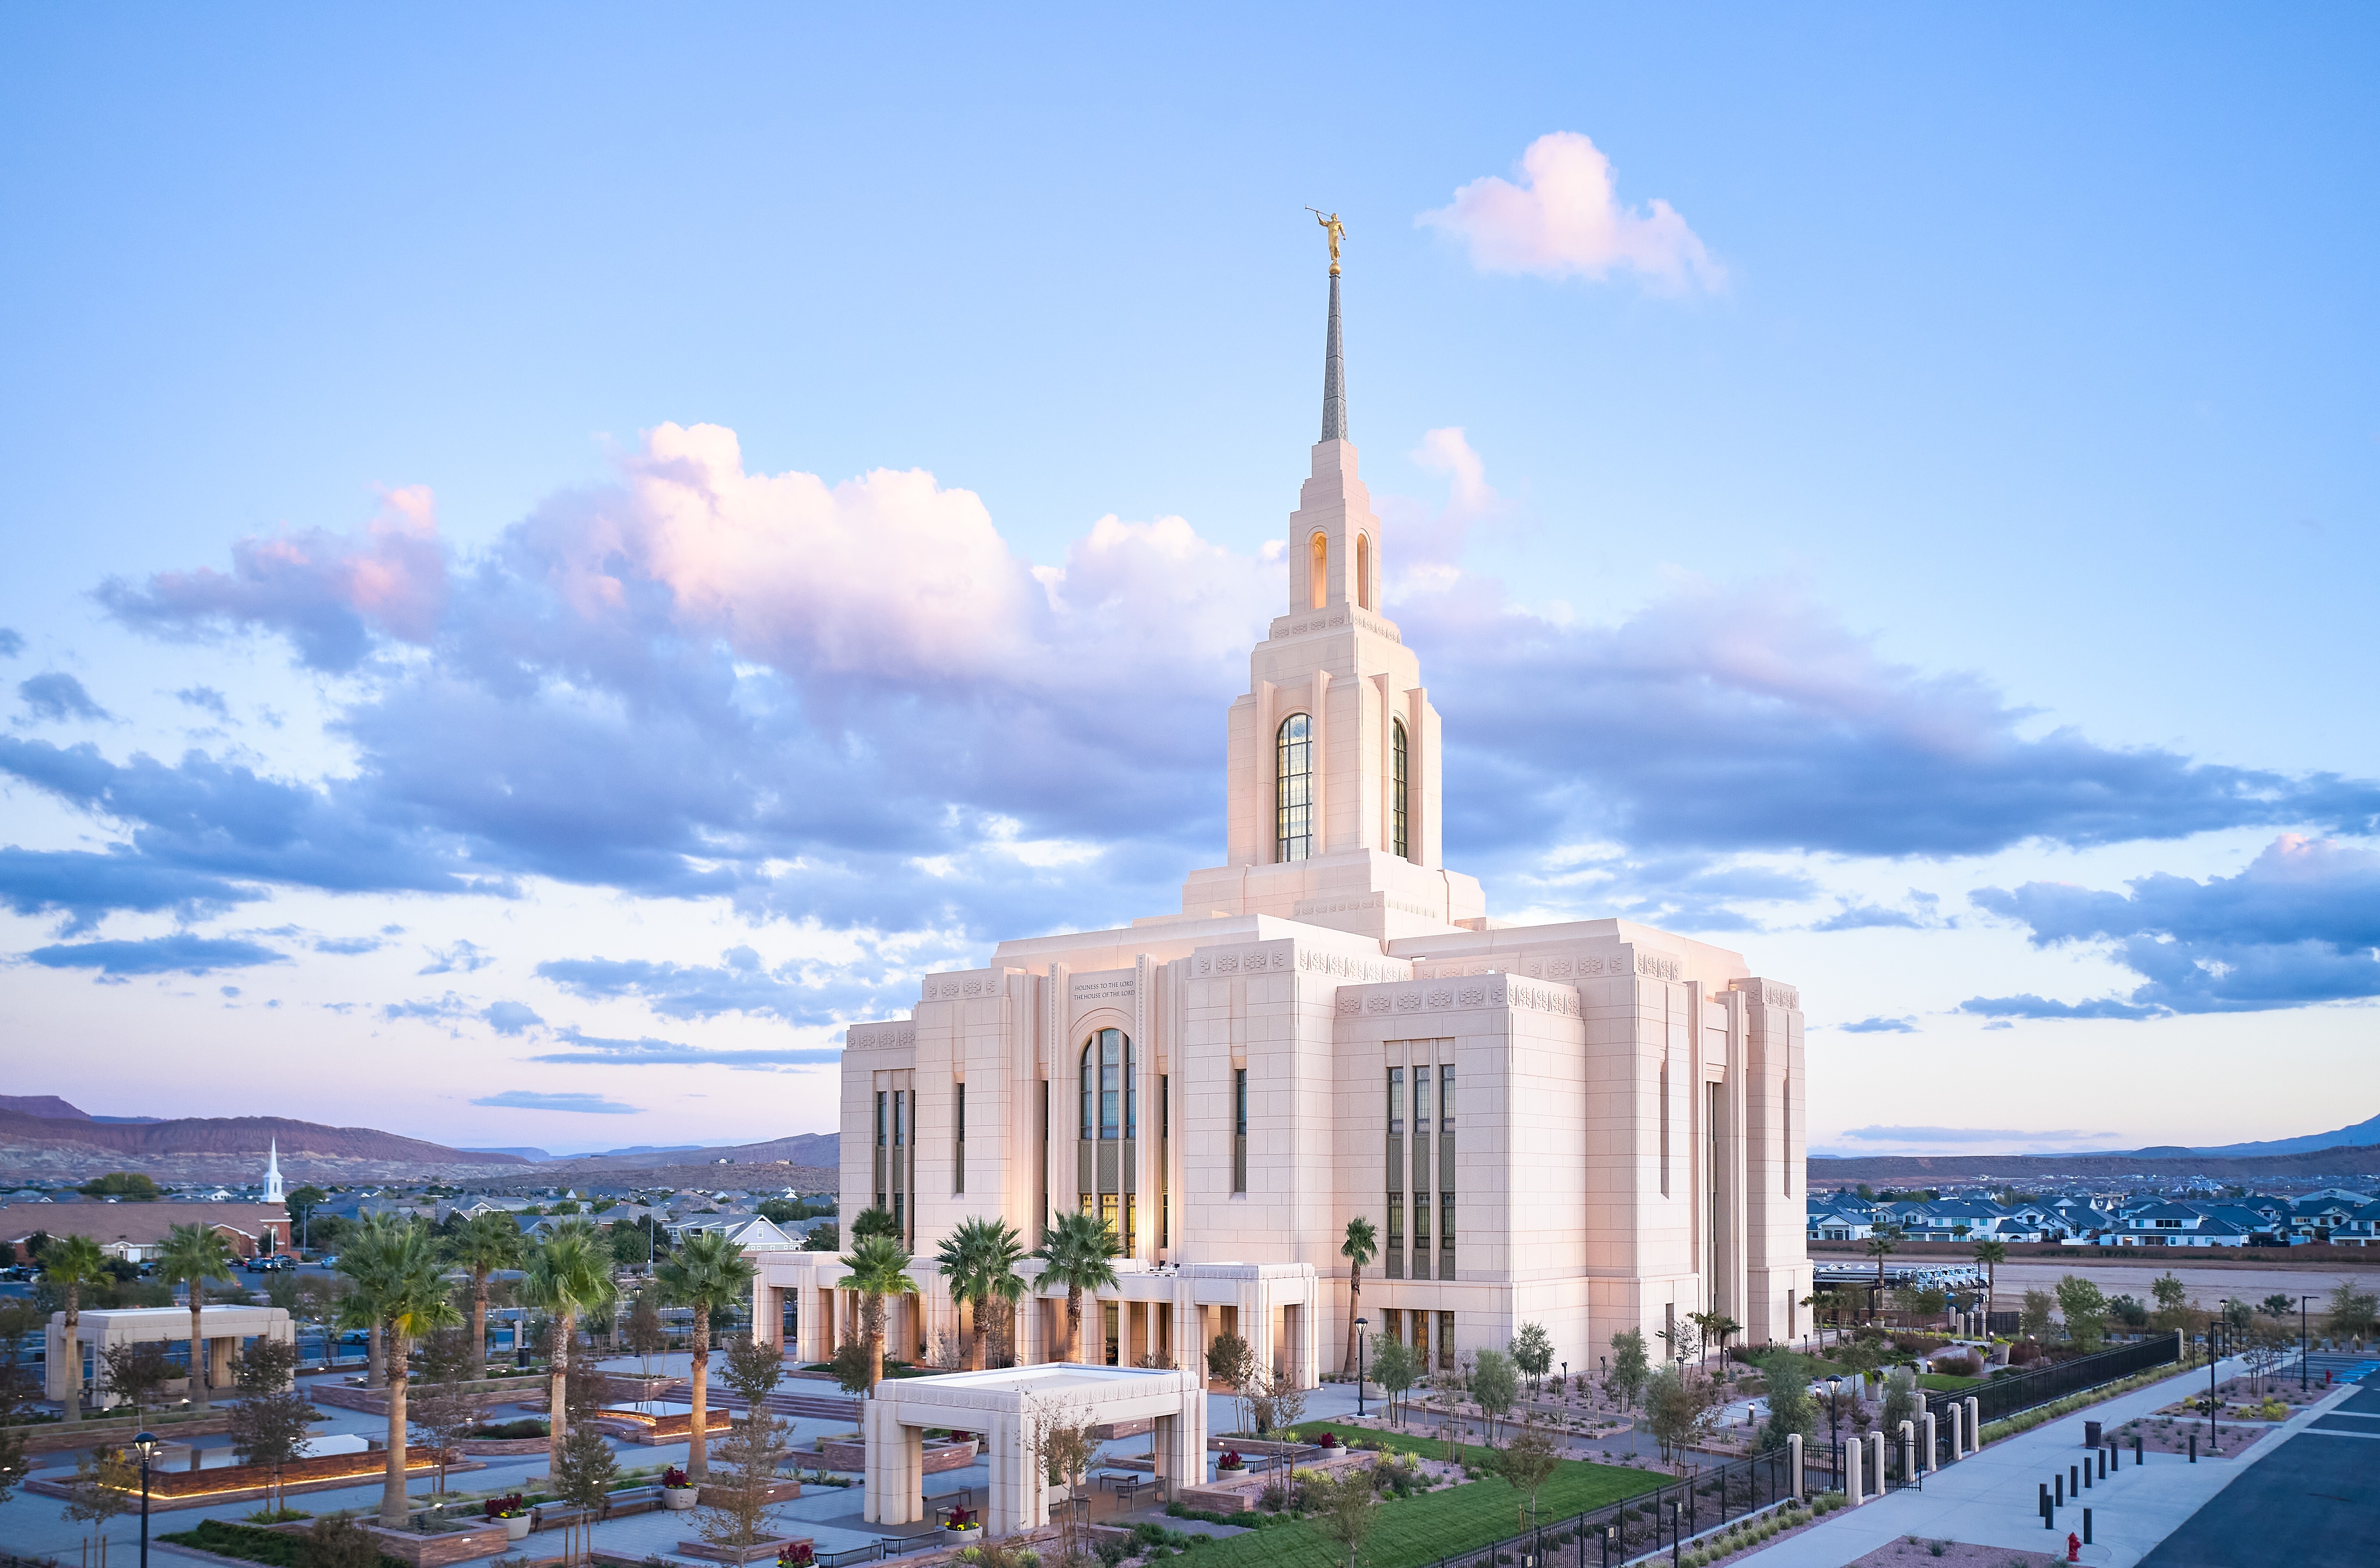 The exterior of the Red Cliffs Utah Temple, a rectangular building with arched windows and a center tower and spire.